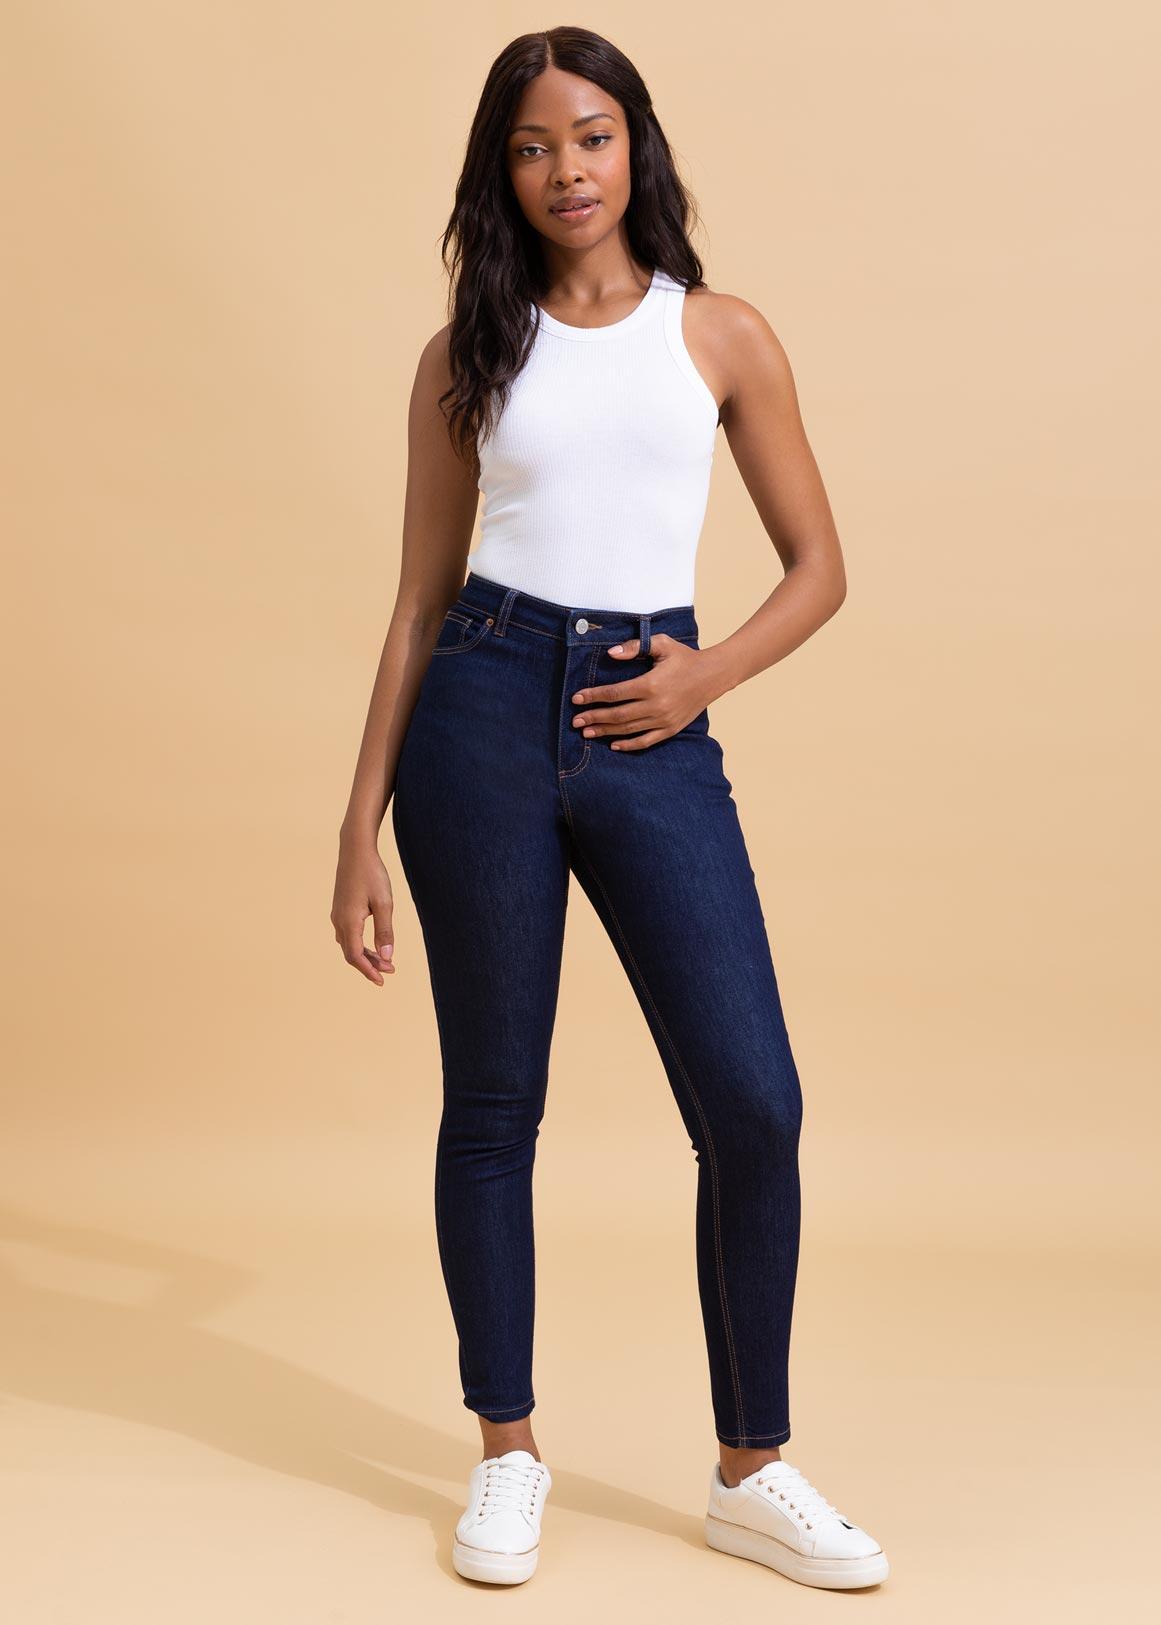 Women's Ultra High-Rise Dad Jeans, Women's Clearance